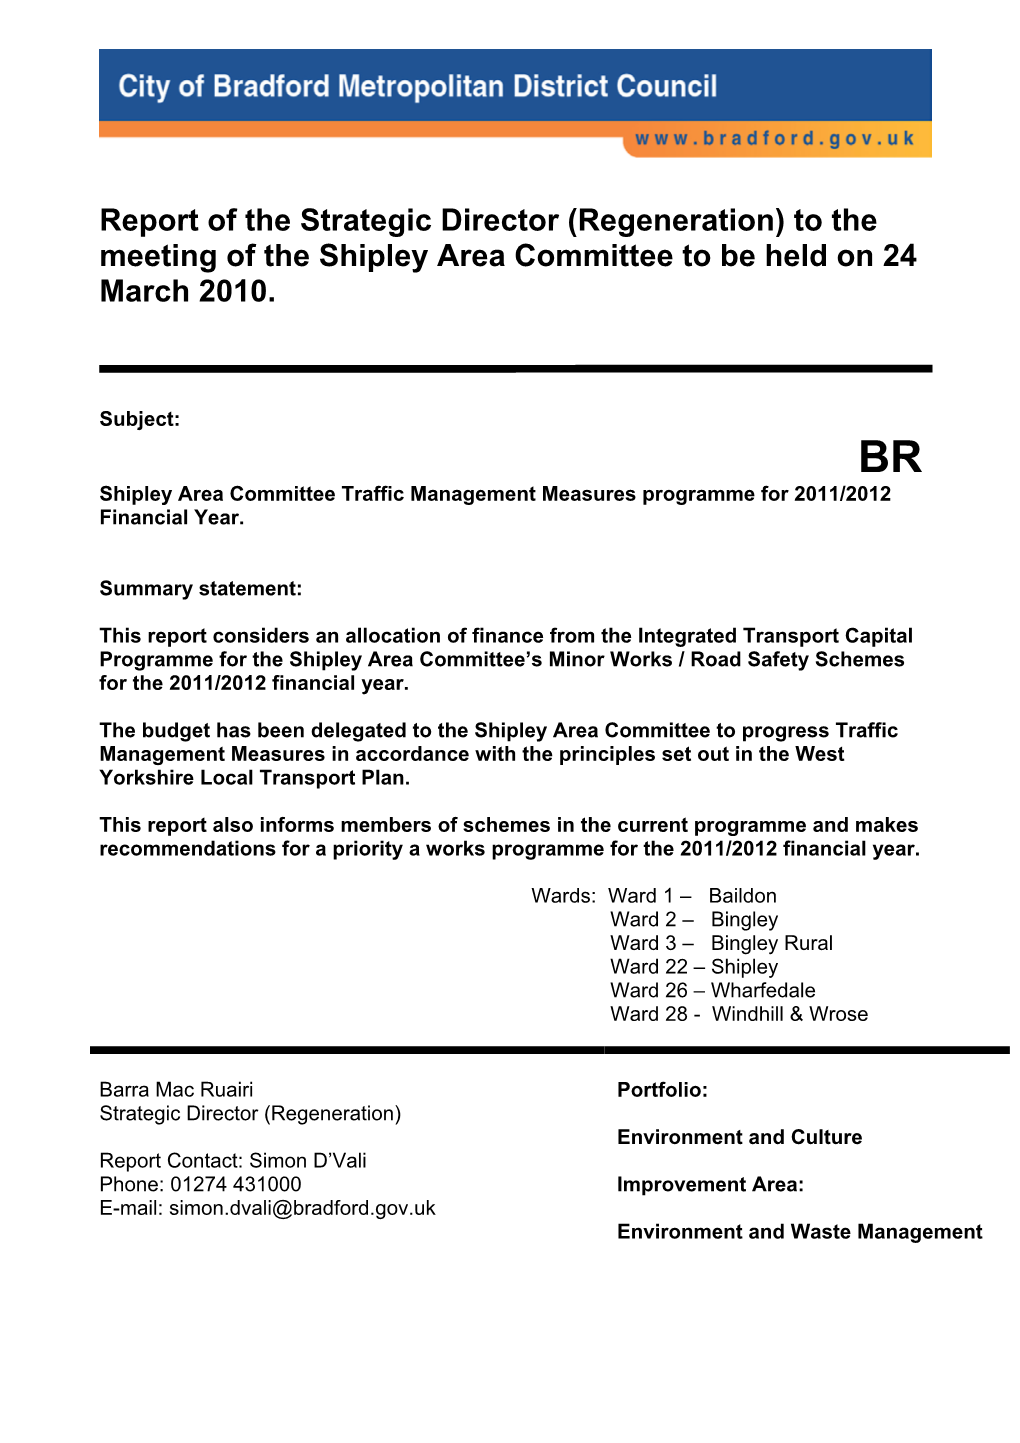 Report of the Strategic Director (Regeneration) to the Meeting of the Shipley Area Committee to Be Held on 24 March 2010